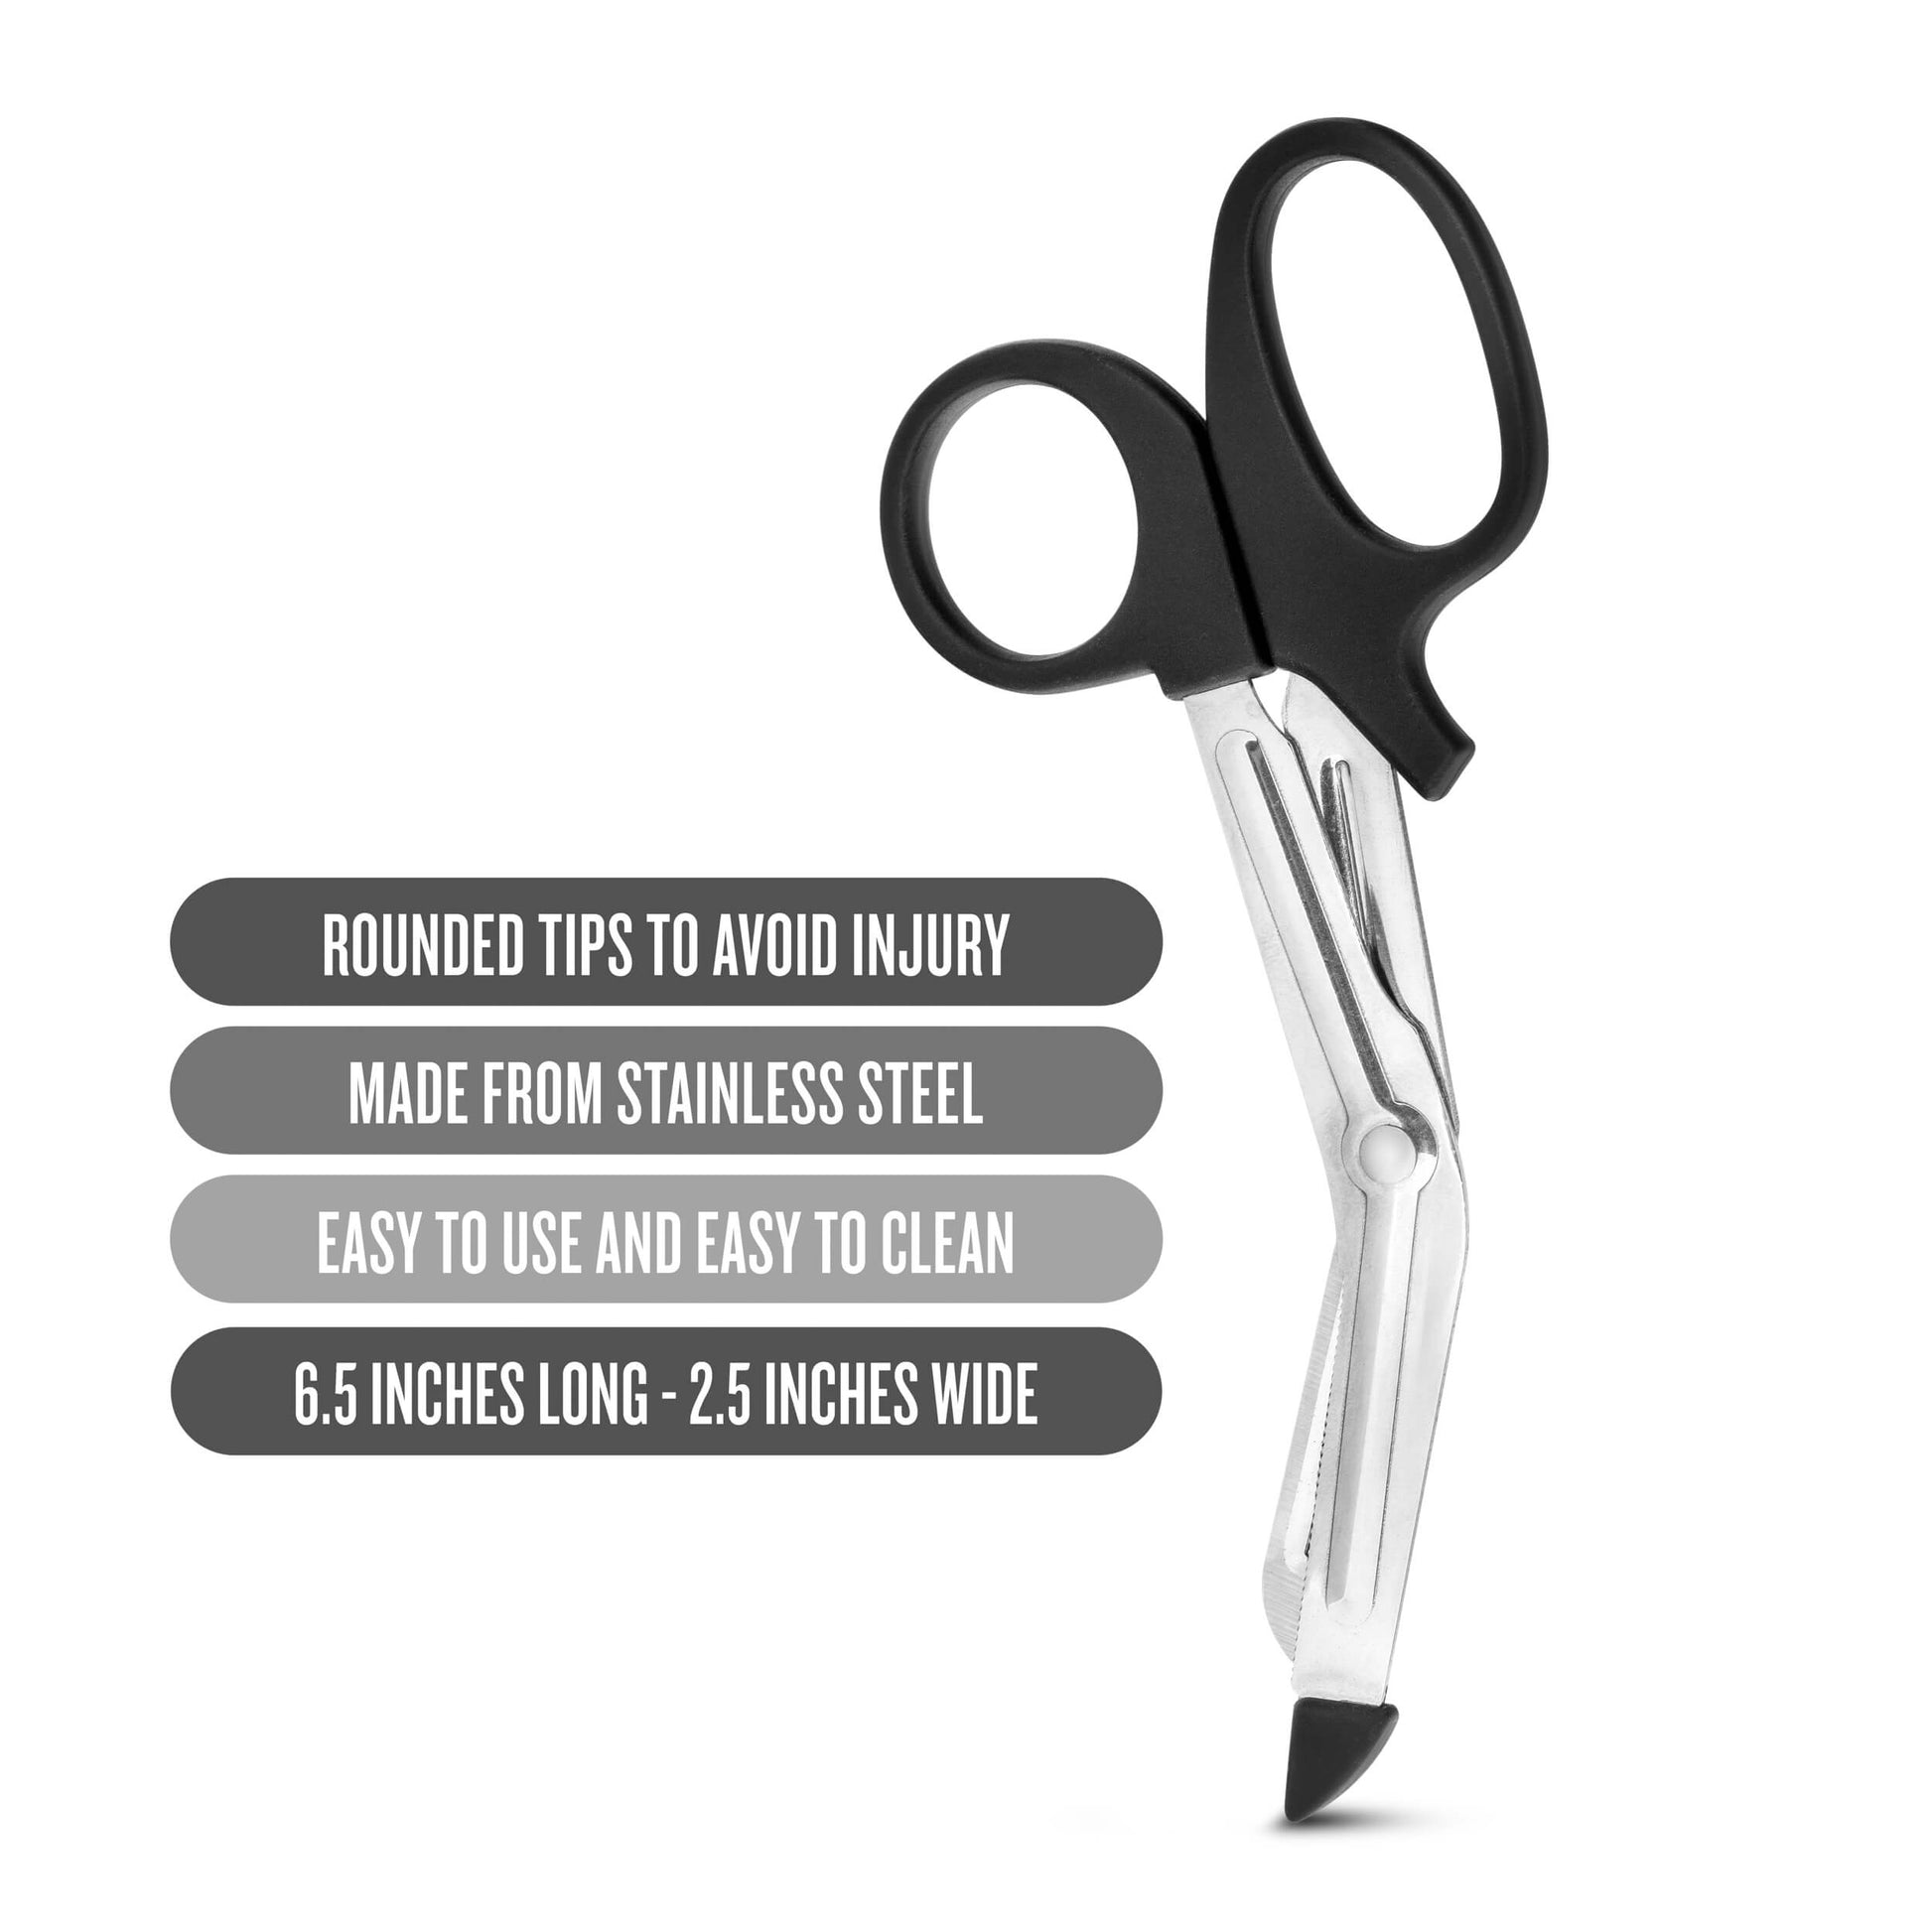 Temptasia Safety Scissors - Blush Novelties - by The Bigger O - an online sex toy shop. We ship to USA, Canada and the UK.